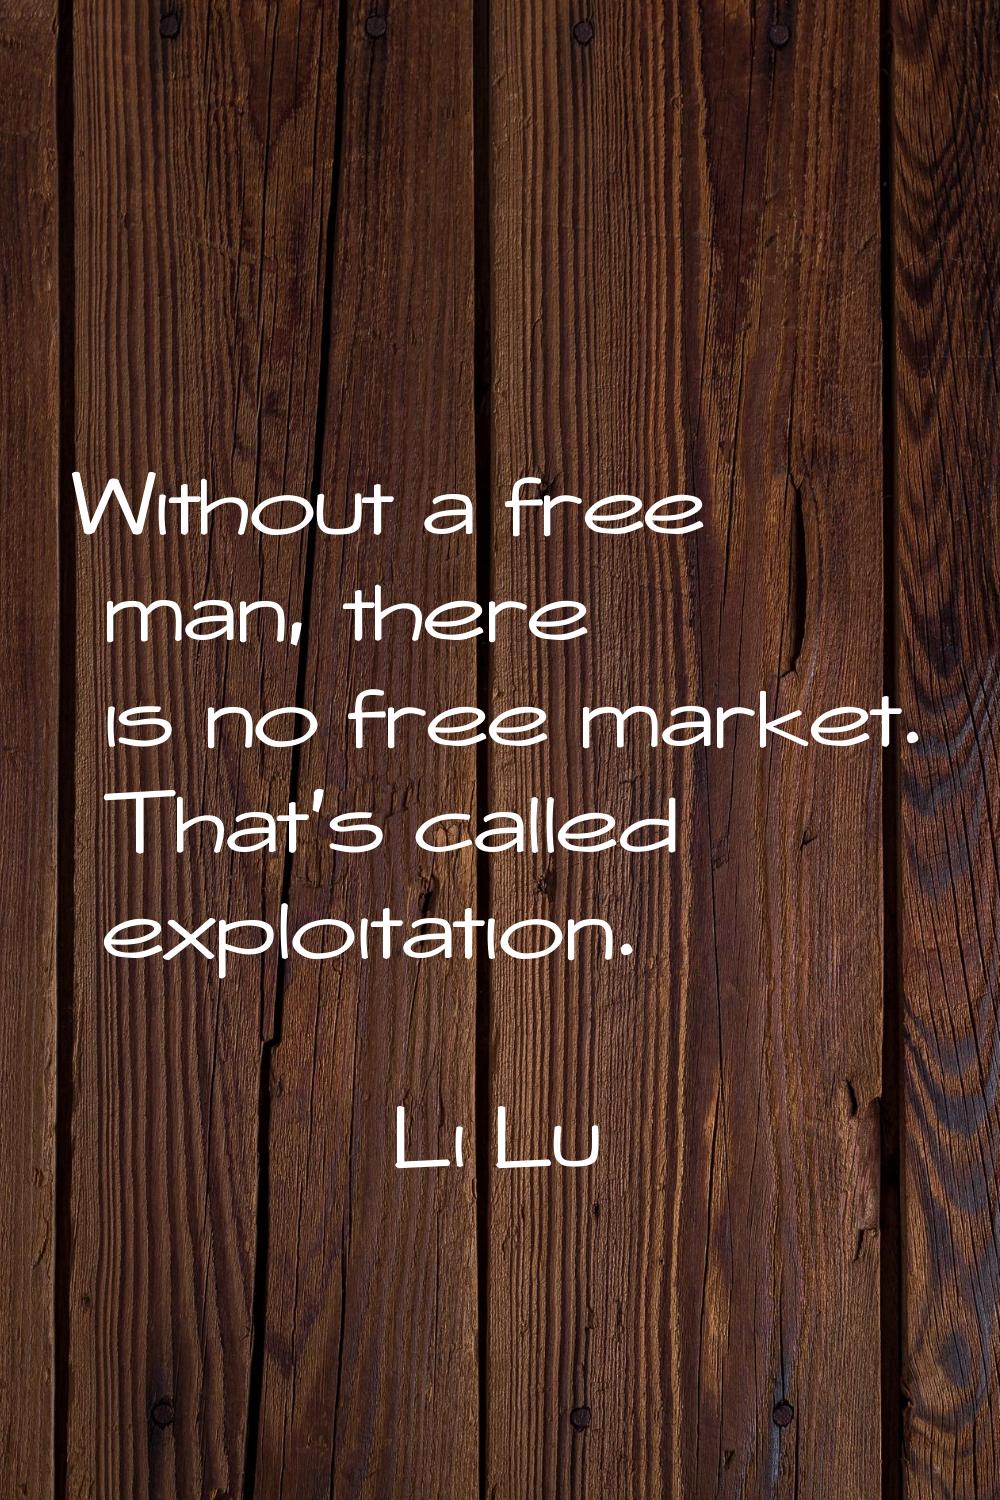 Without a free man, there is no free market. That's called exploitation.